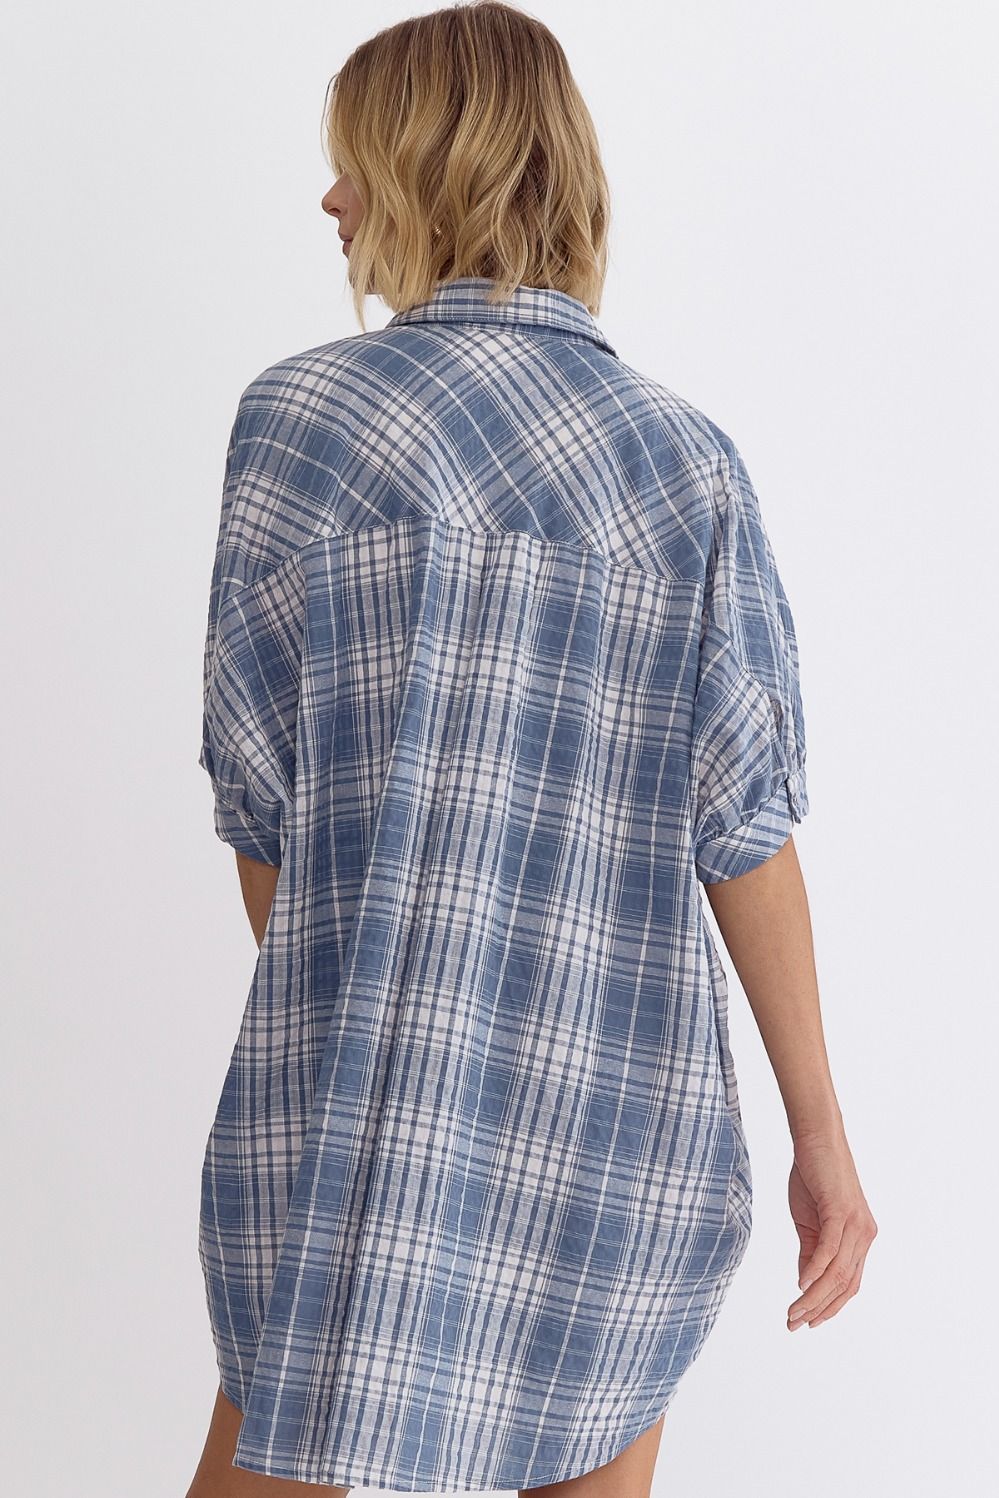 Plaid Collared Button Up Dress